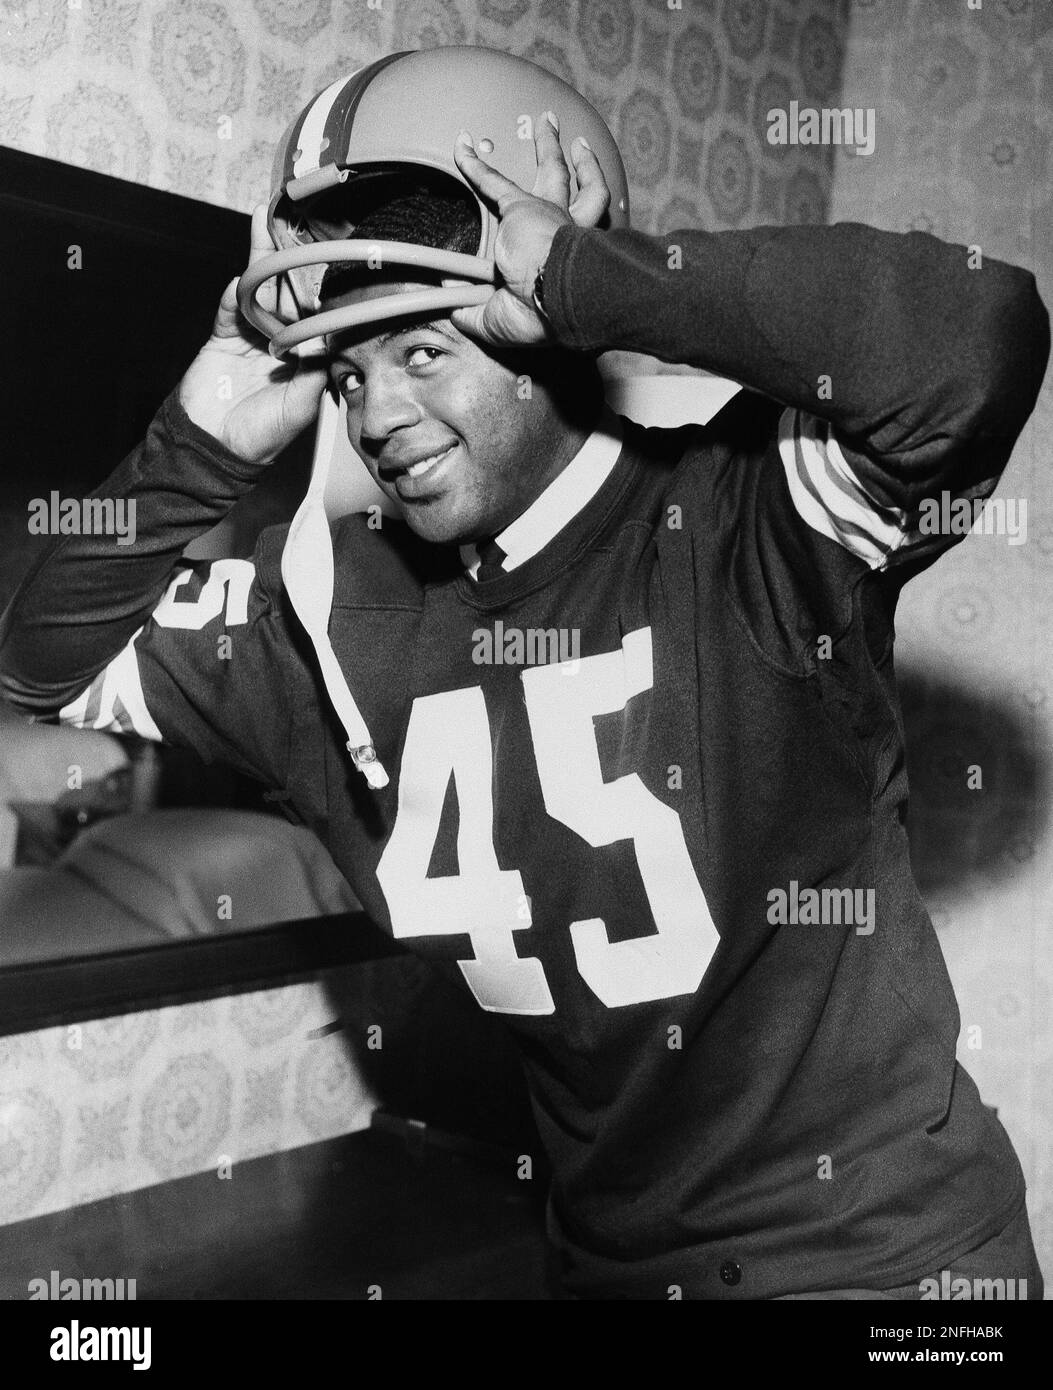 All-America halfback Ernie Davis of Syracuse, who has signed a 3-year,  $80,000 contract with the Cleveland Browns of the National Football League,  is making his first visit this weekend. He may or